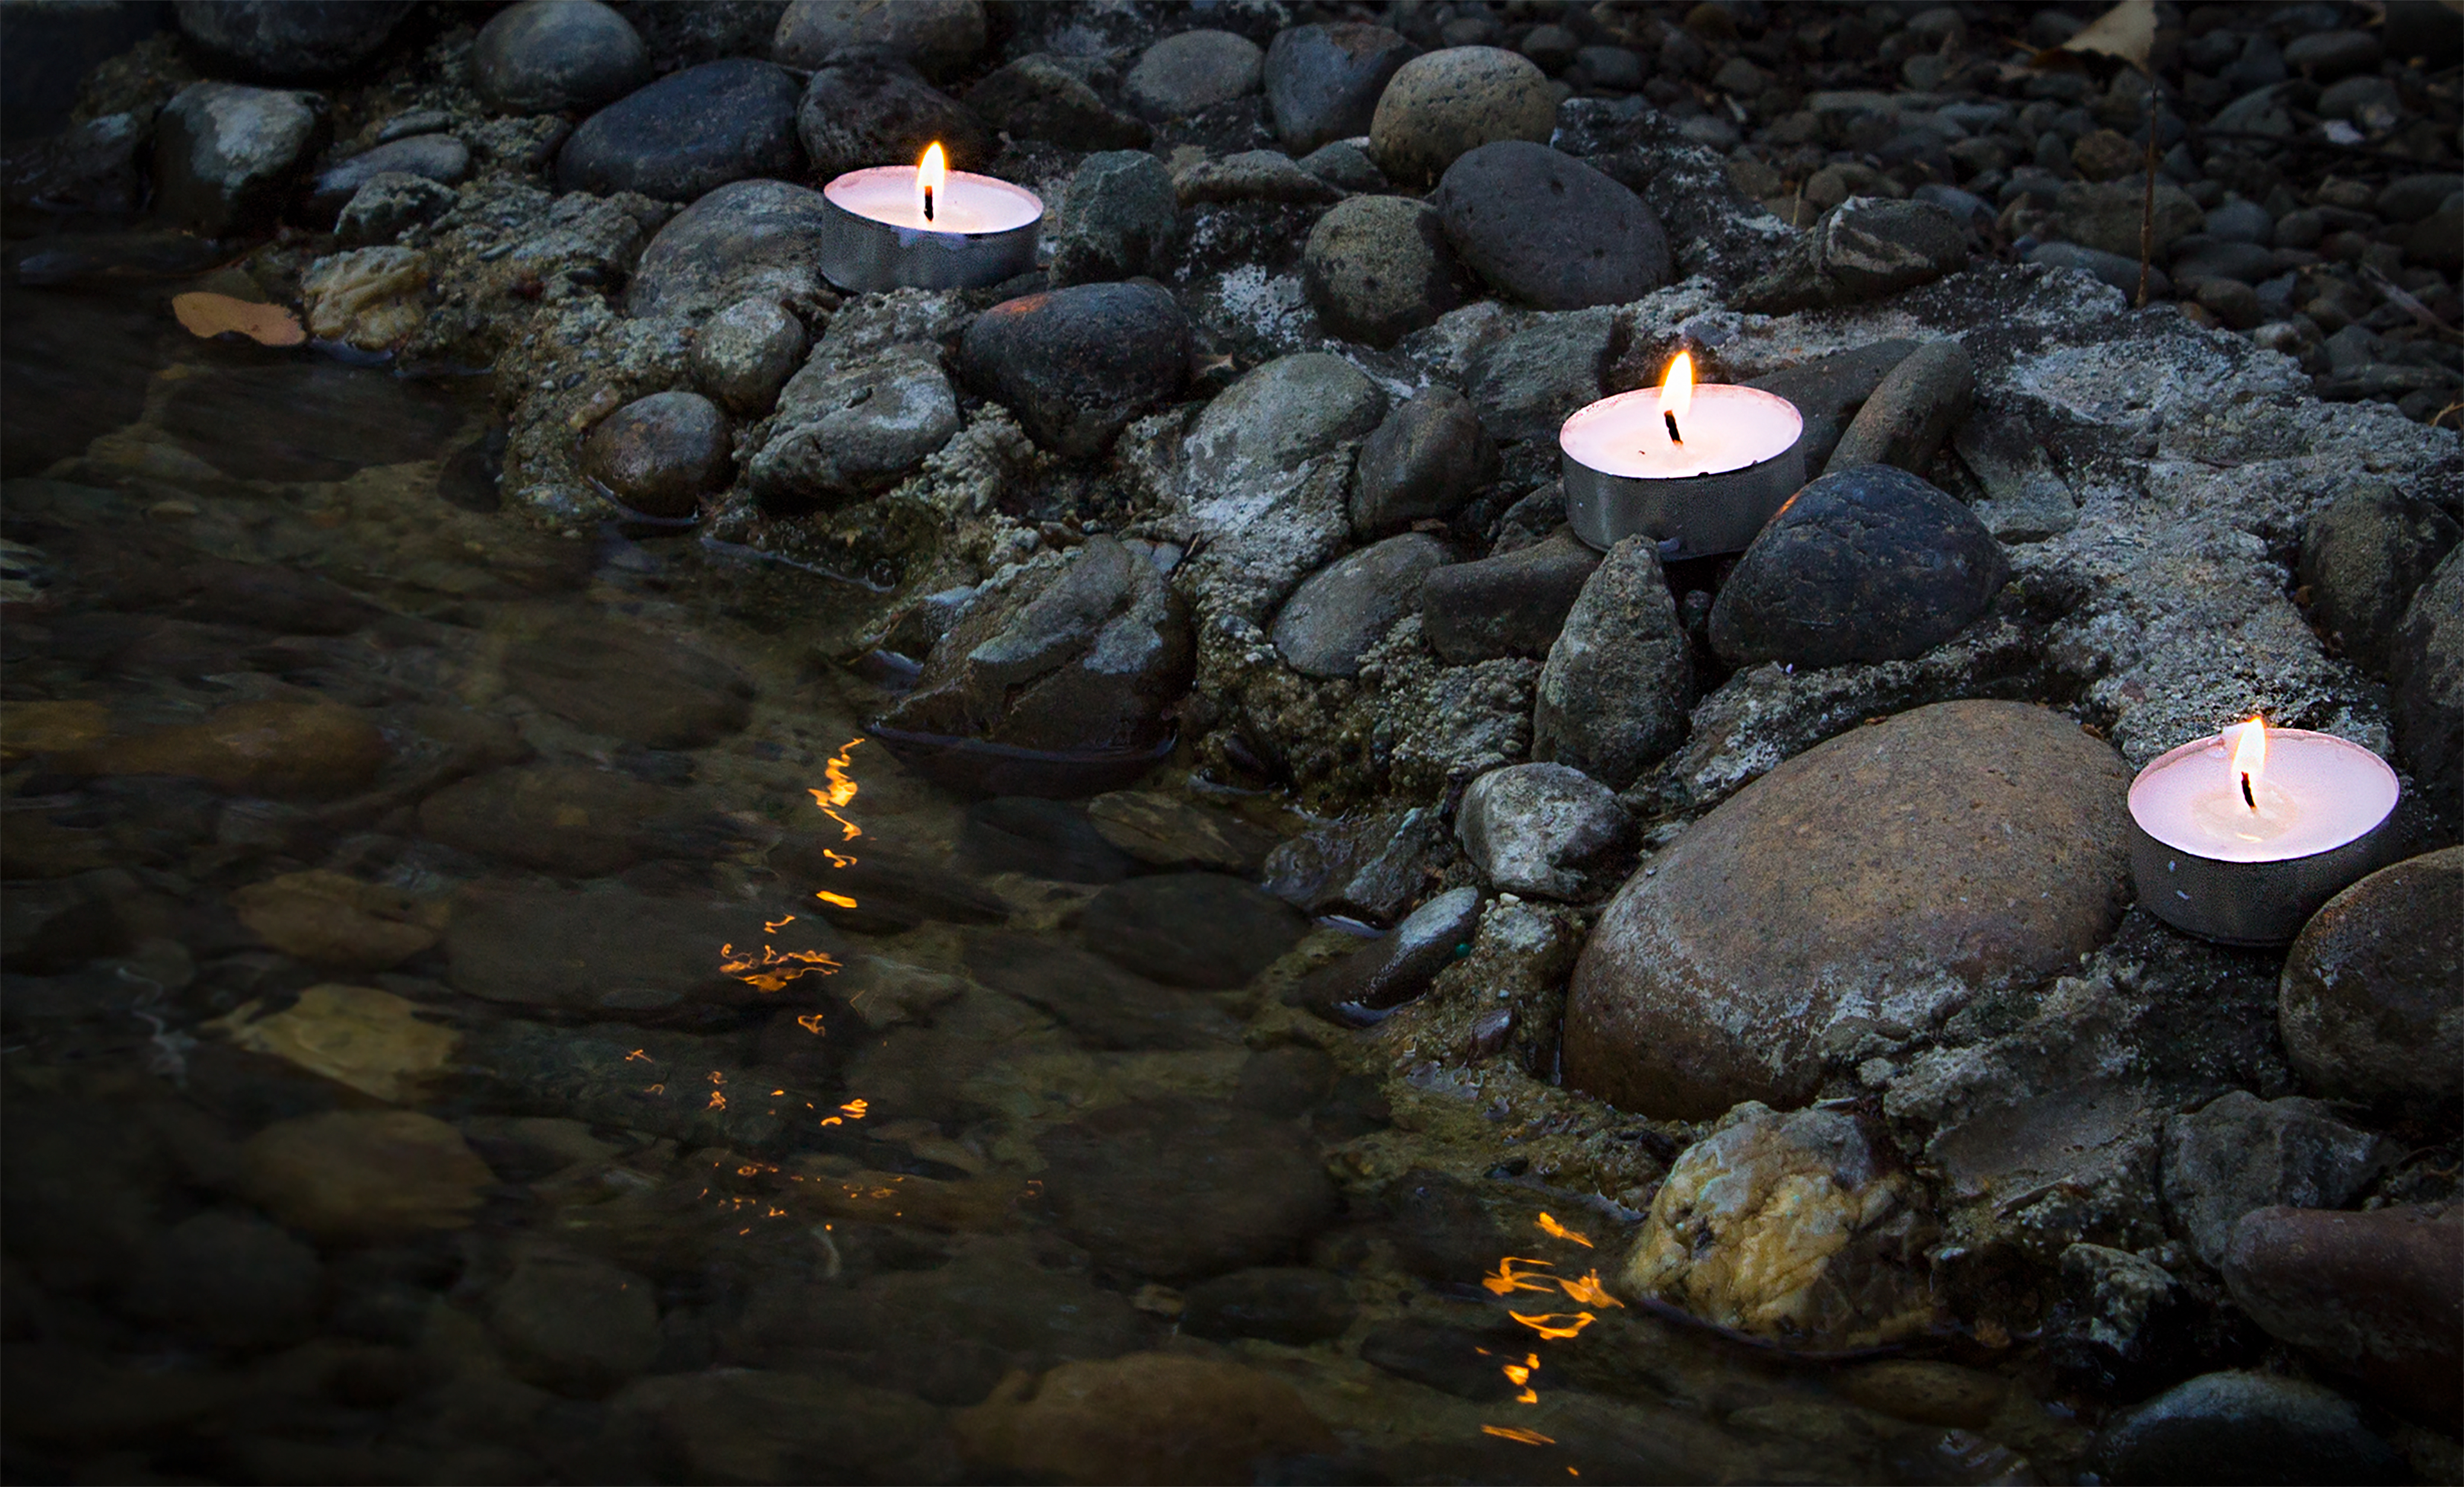 This is a picture of candles on rocks beside a stream.